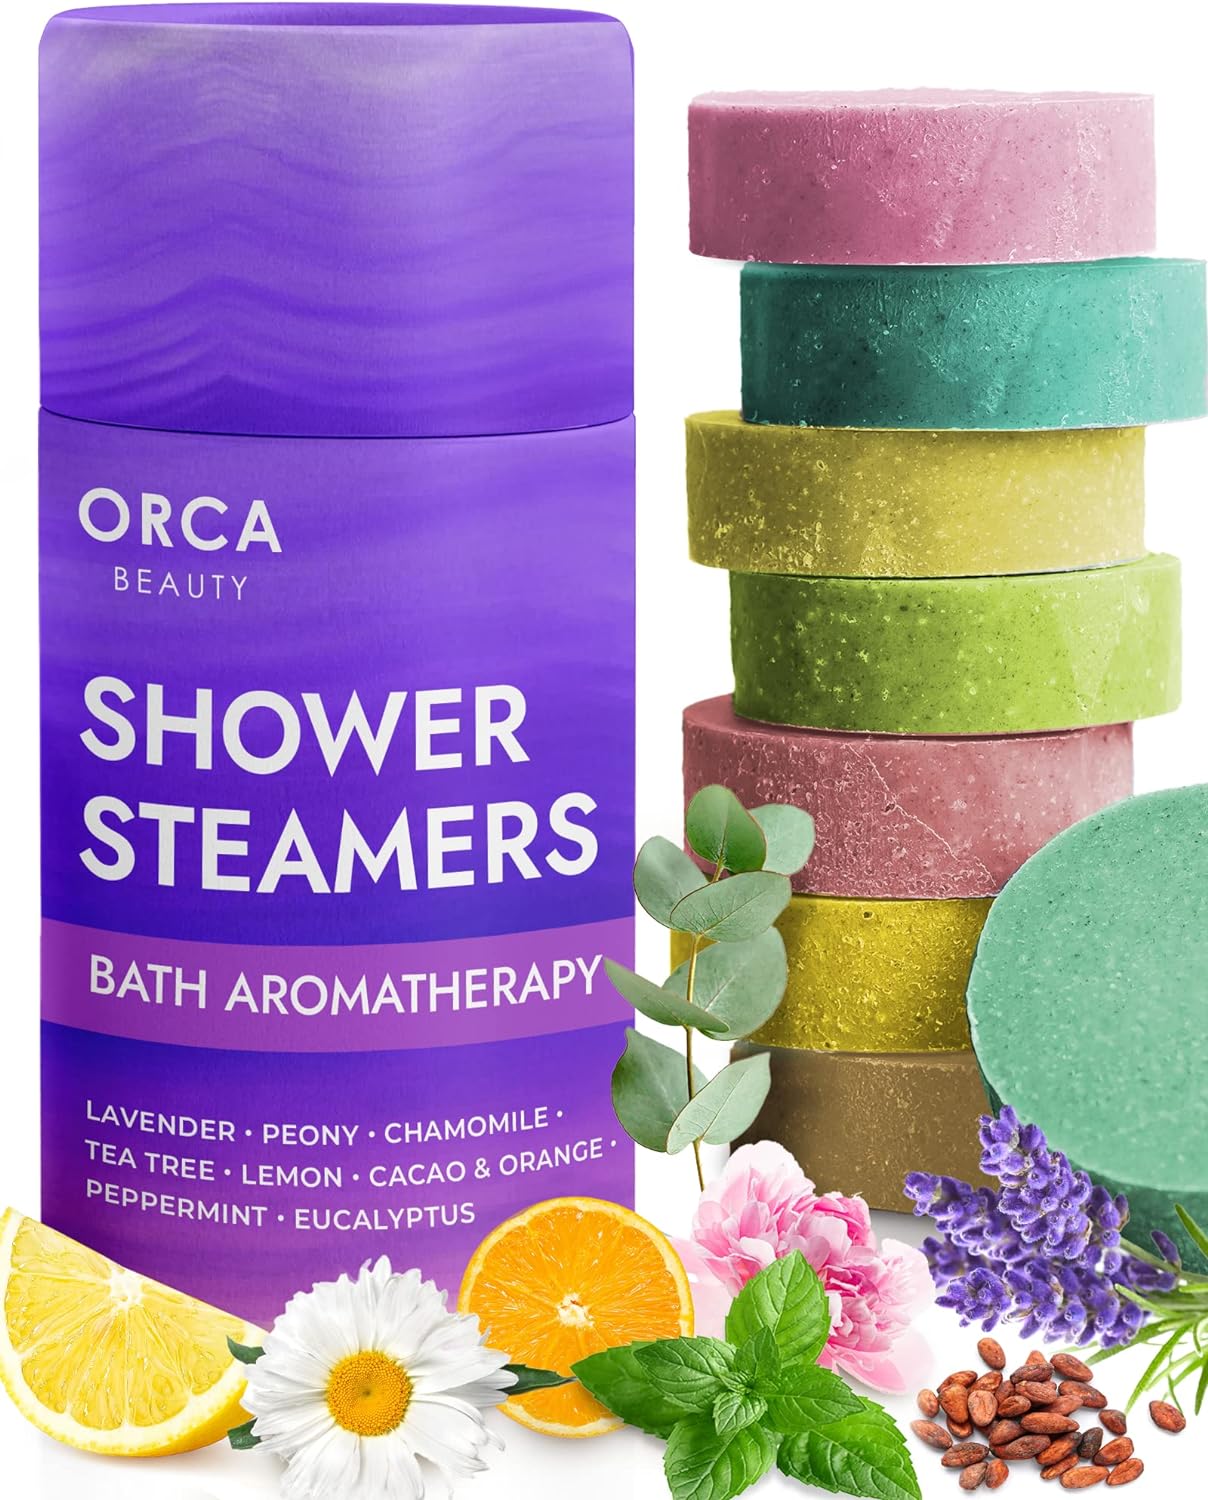 Shower Steamers Aromatherapy 8 Shower Bombs Tablets - Infused with Lavender Essential Oils, Tea Tree, Eucalyptus,Peppermint Oil - Birthday Gifts for Women, Stocking Stuffers For Women